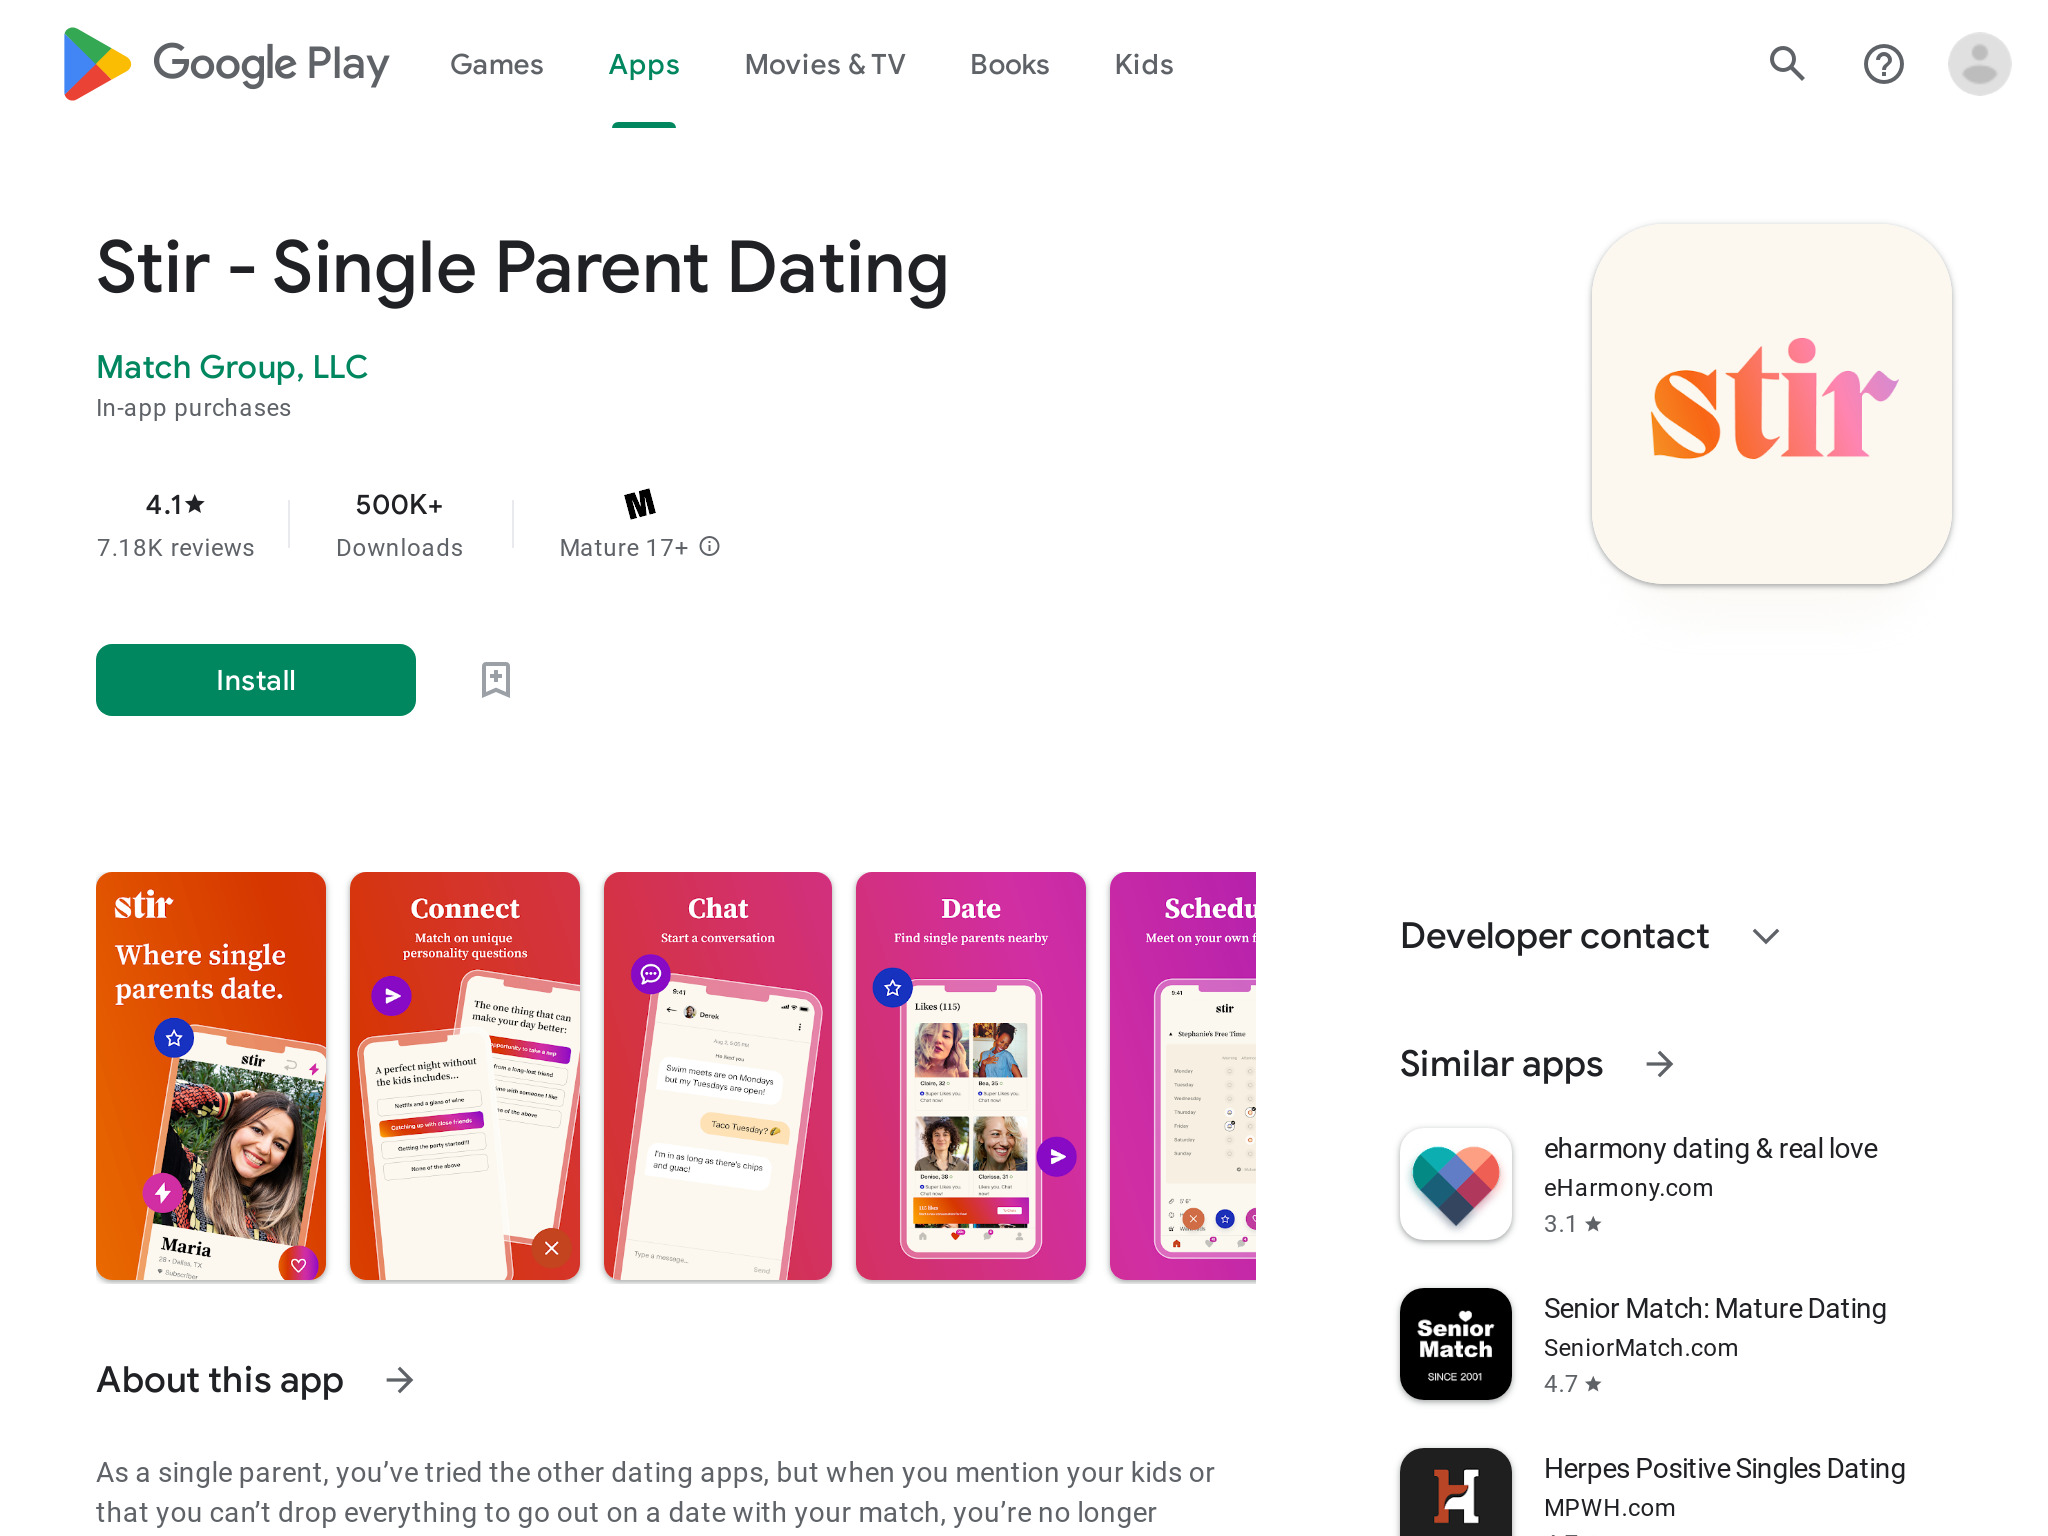 stir 2023 Review: A Unique Dating Opportunity Or Just A Scam?